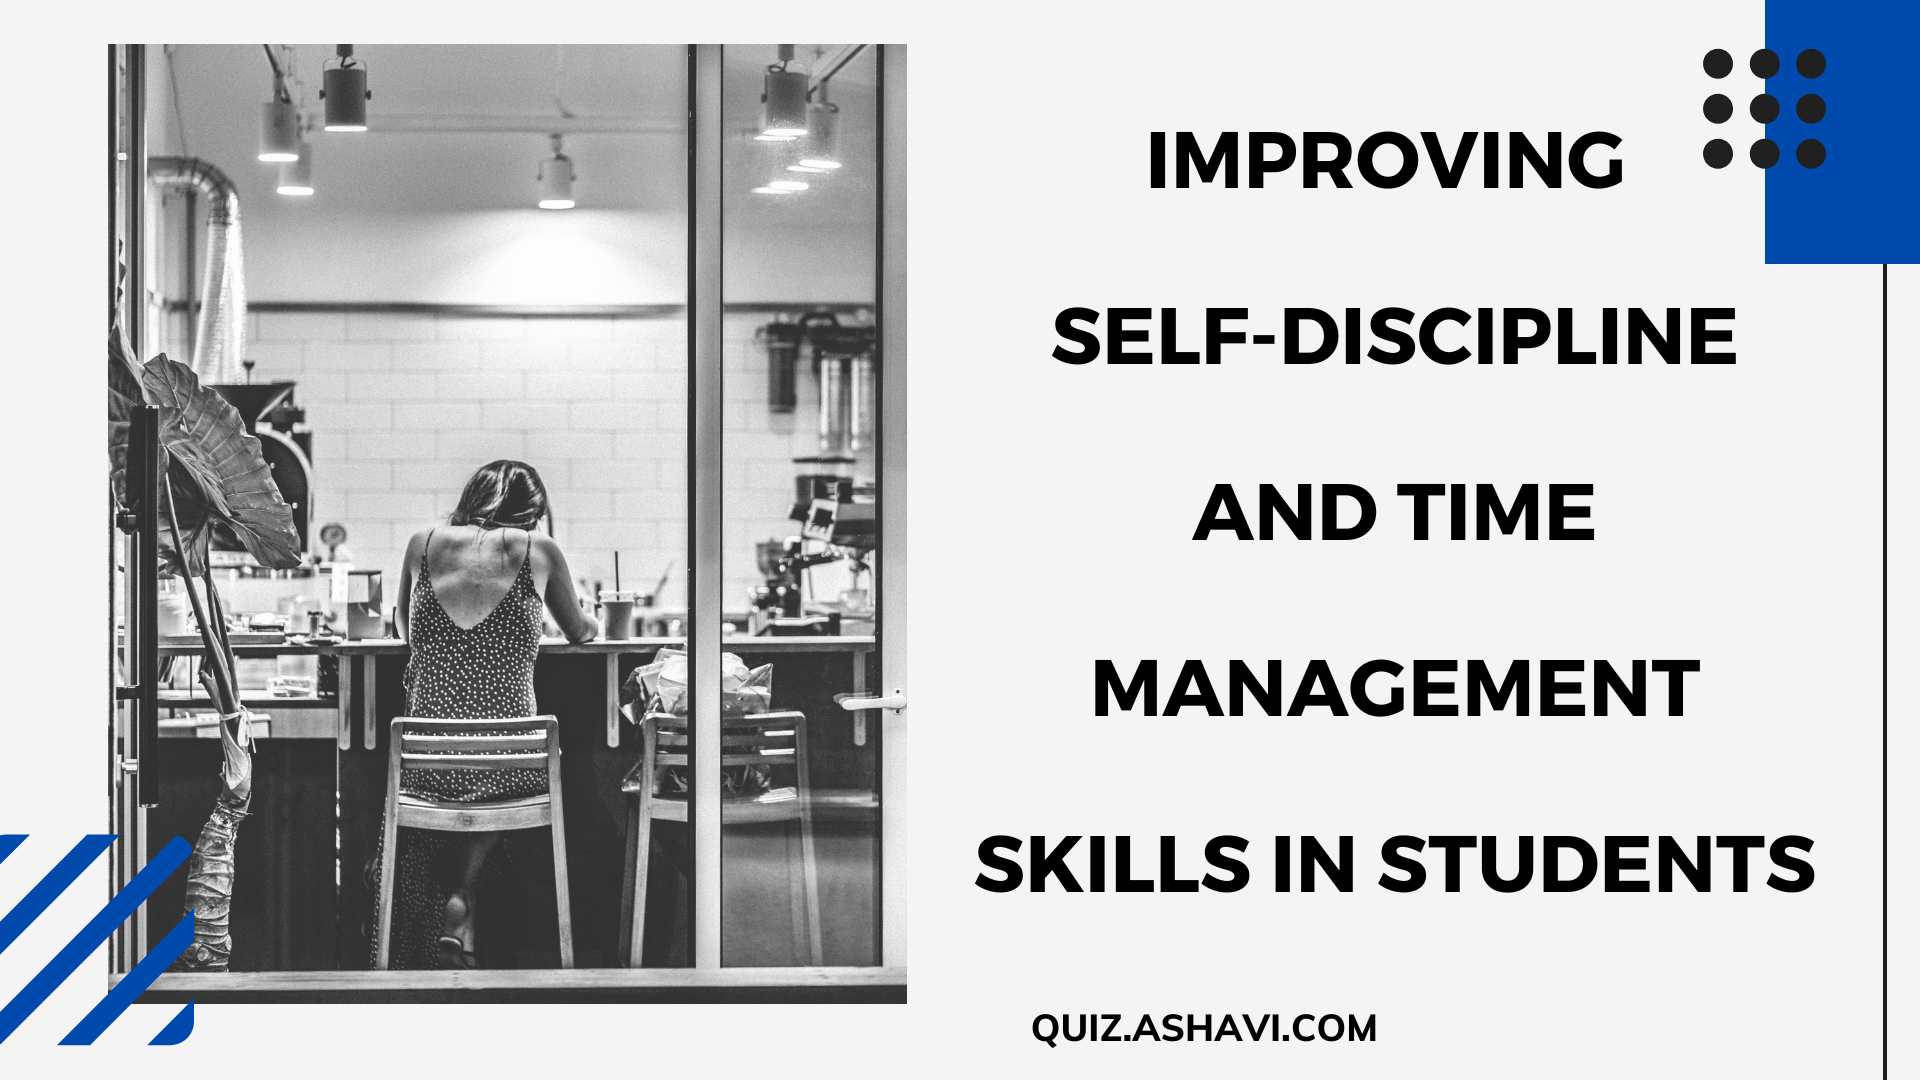 Improving Self-Discipline and Time Management Skills in Students